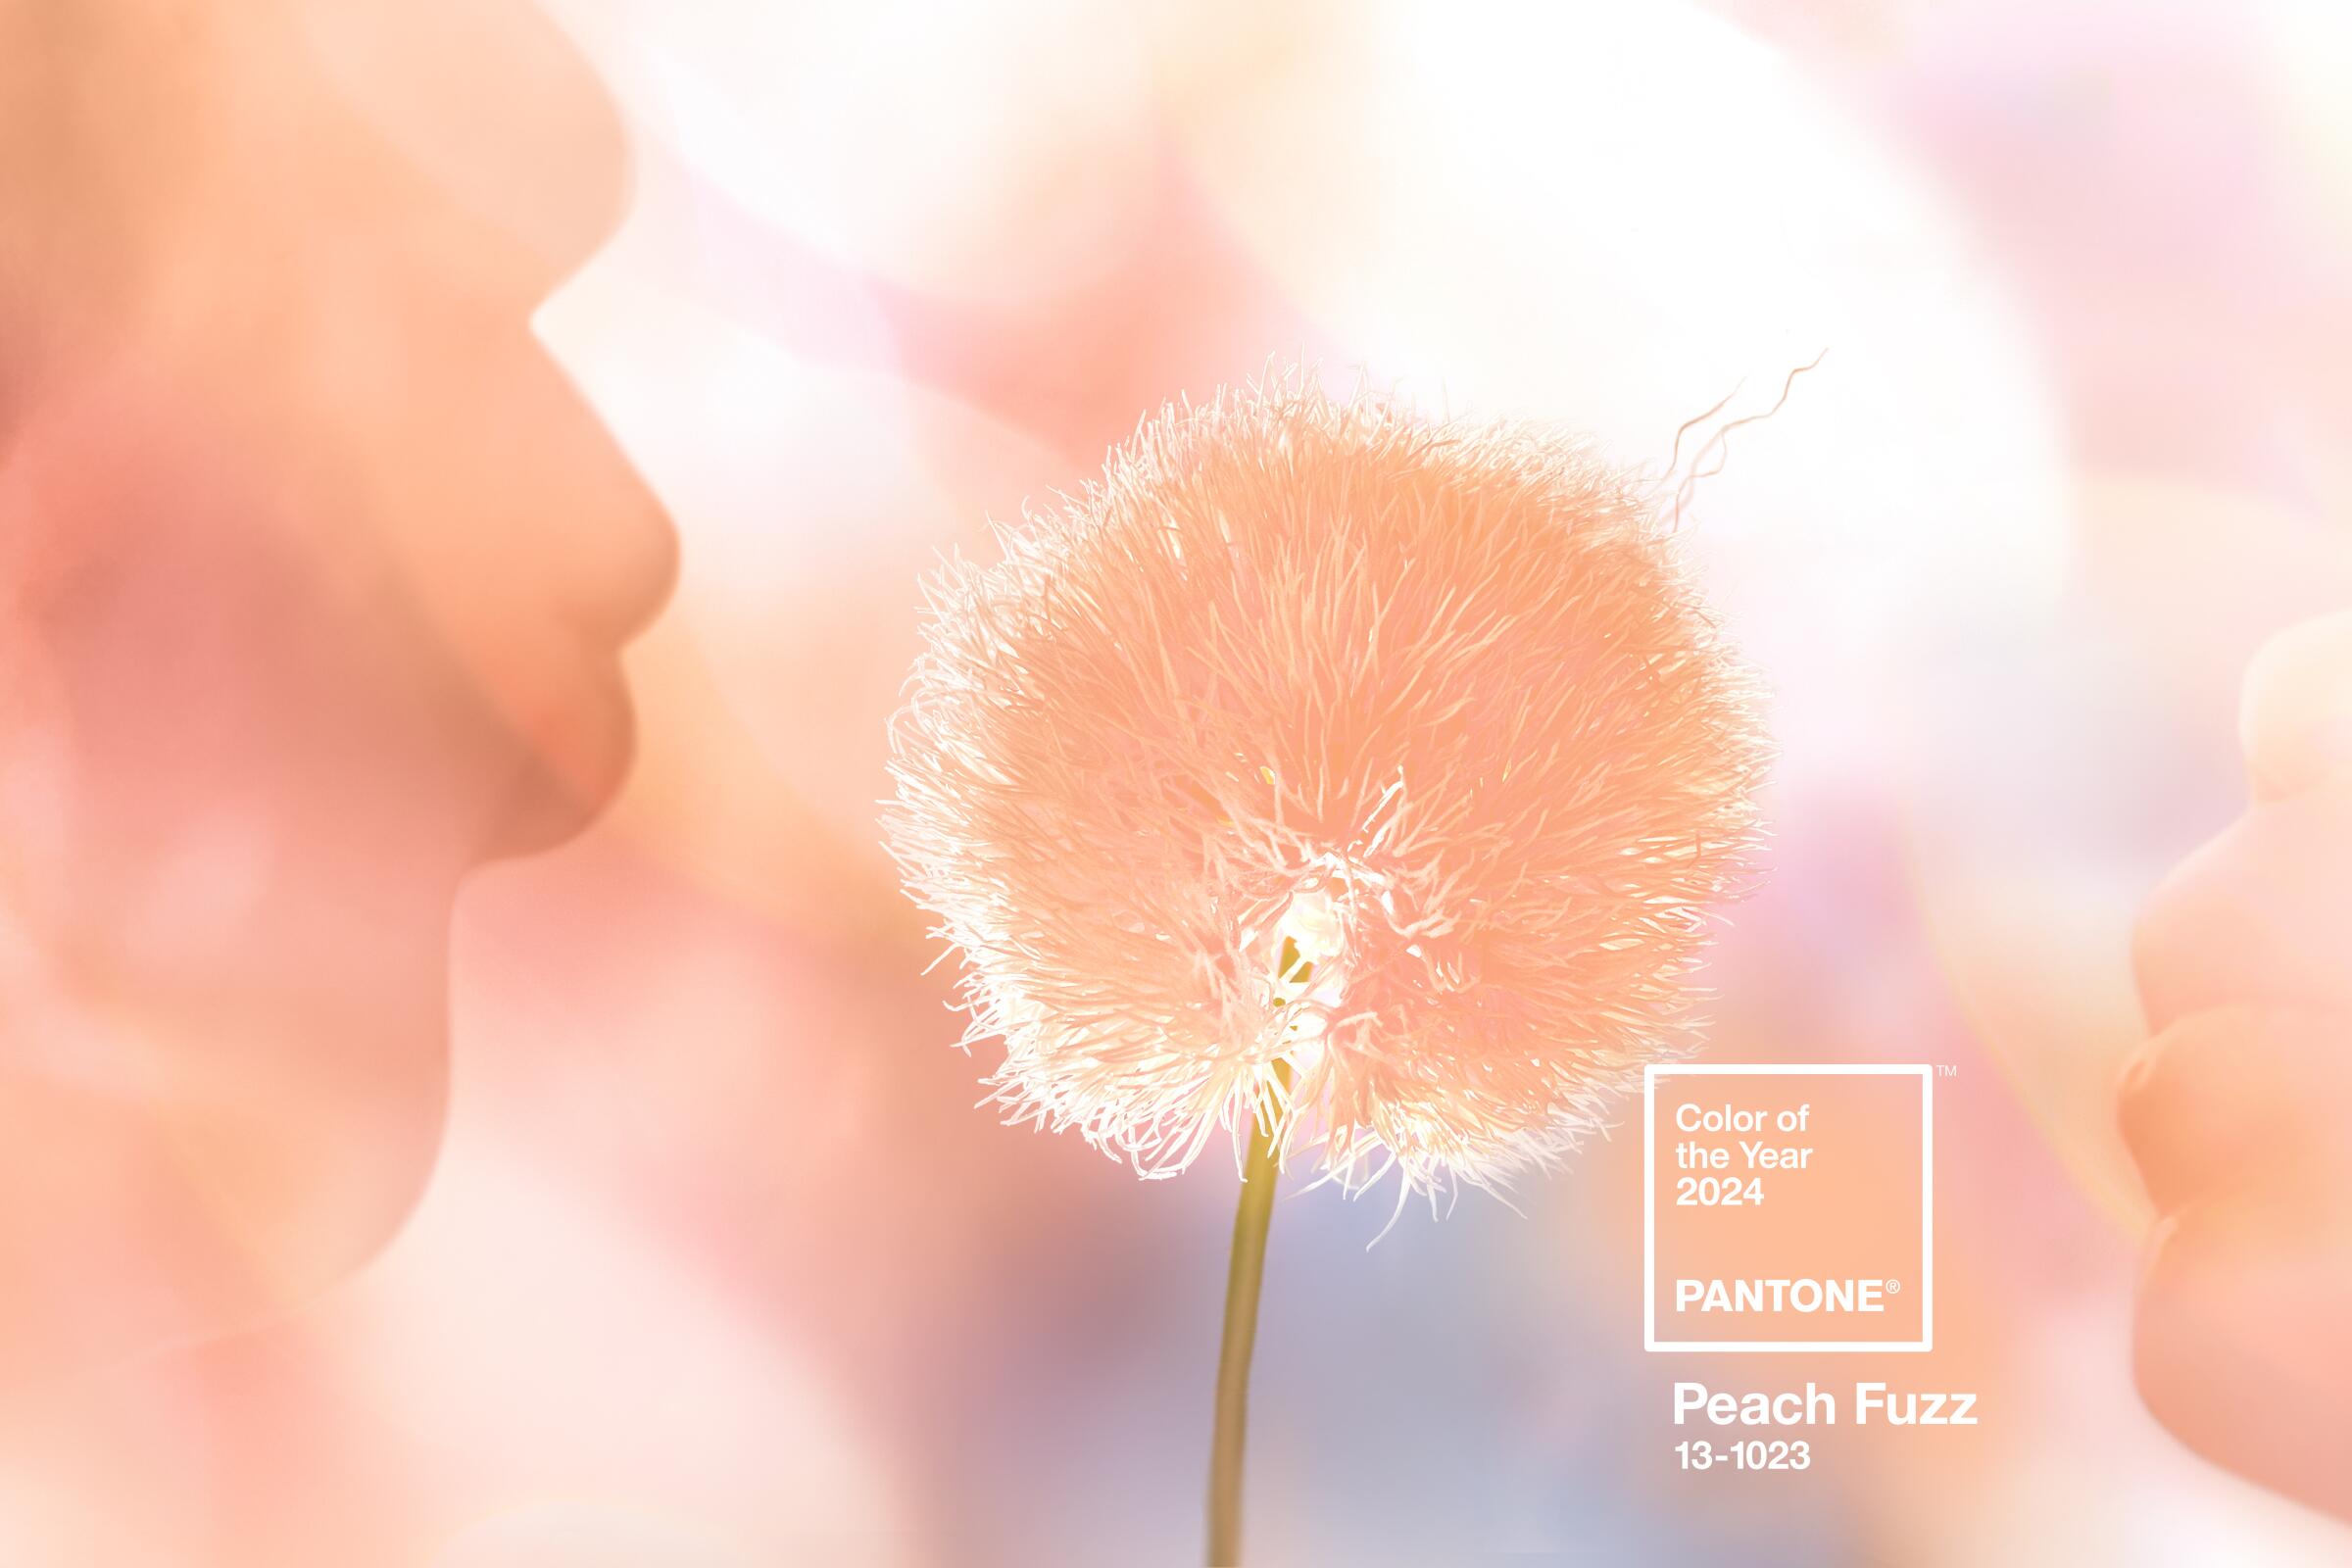 Peach Fuzz is the Pantone Color of the Year - Los Angeles Times